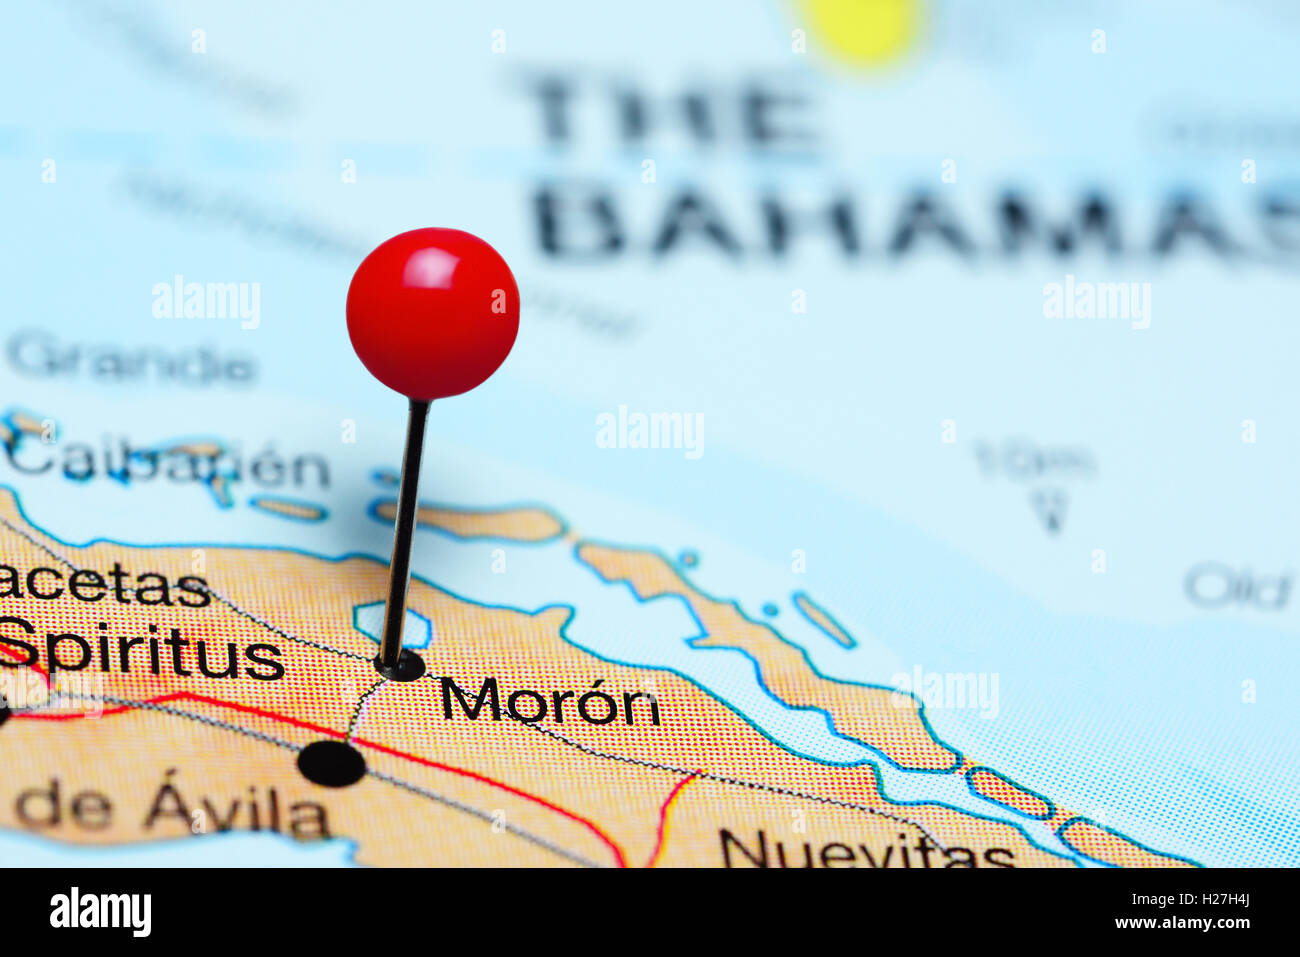 Moron pinned on a map of Cuba Stock Photo